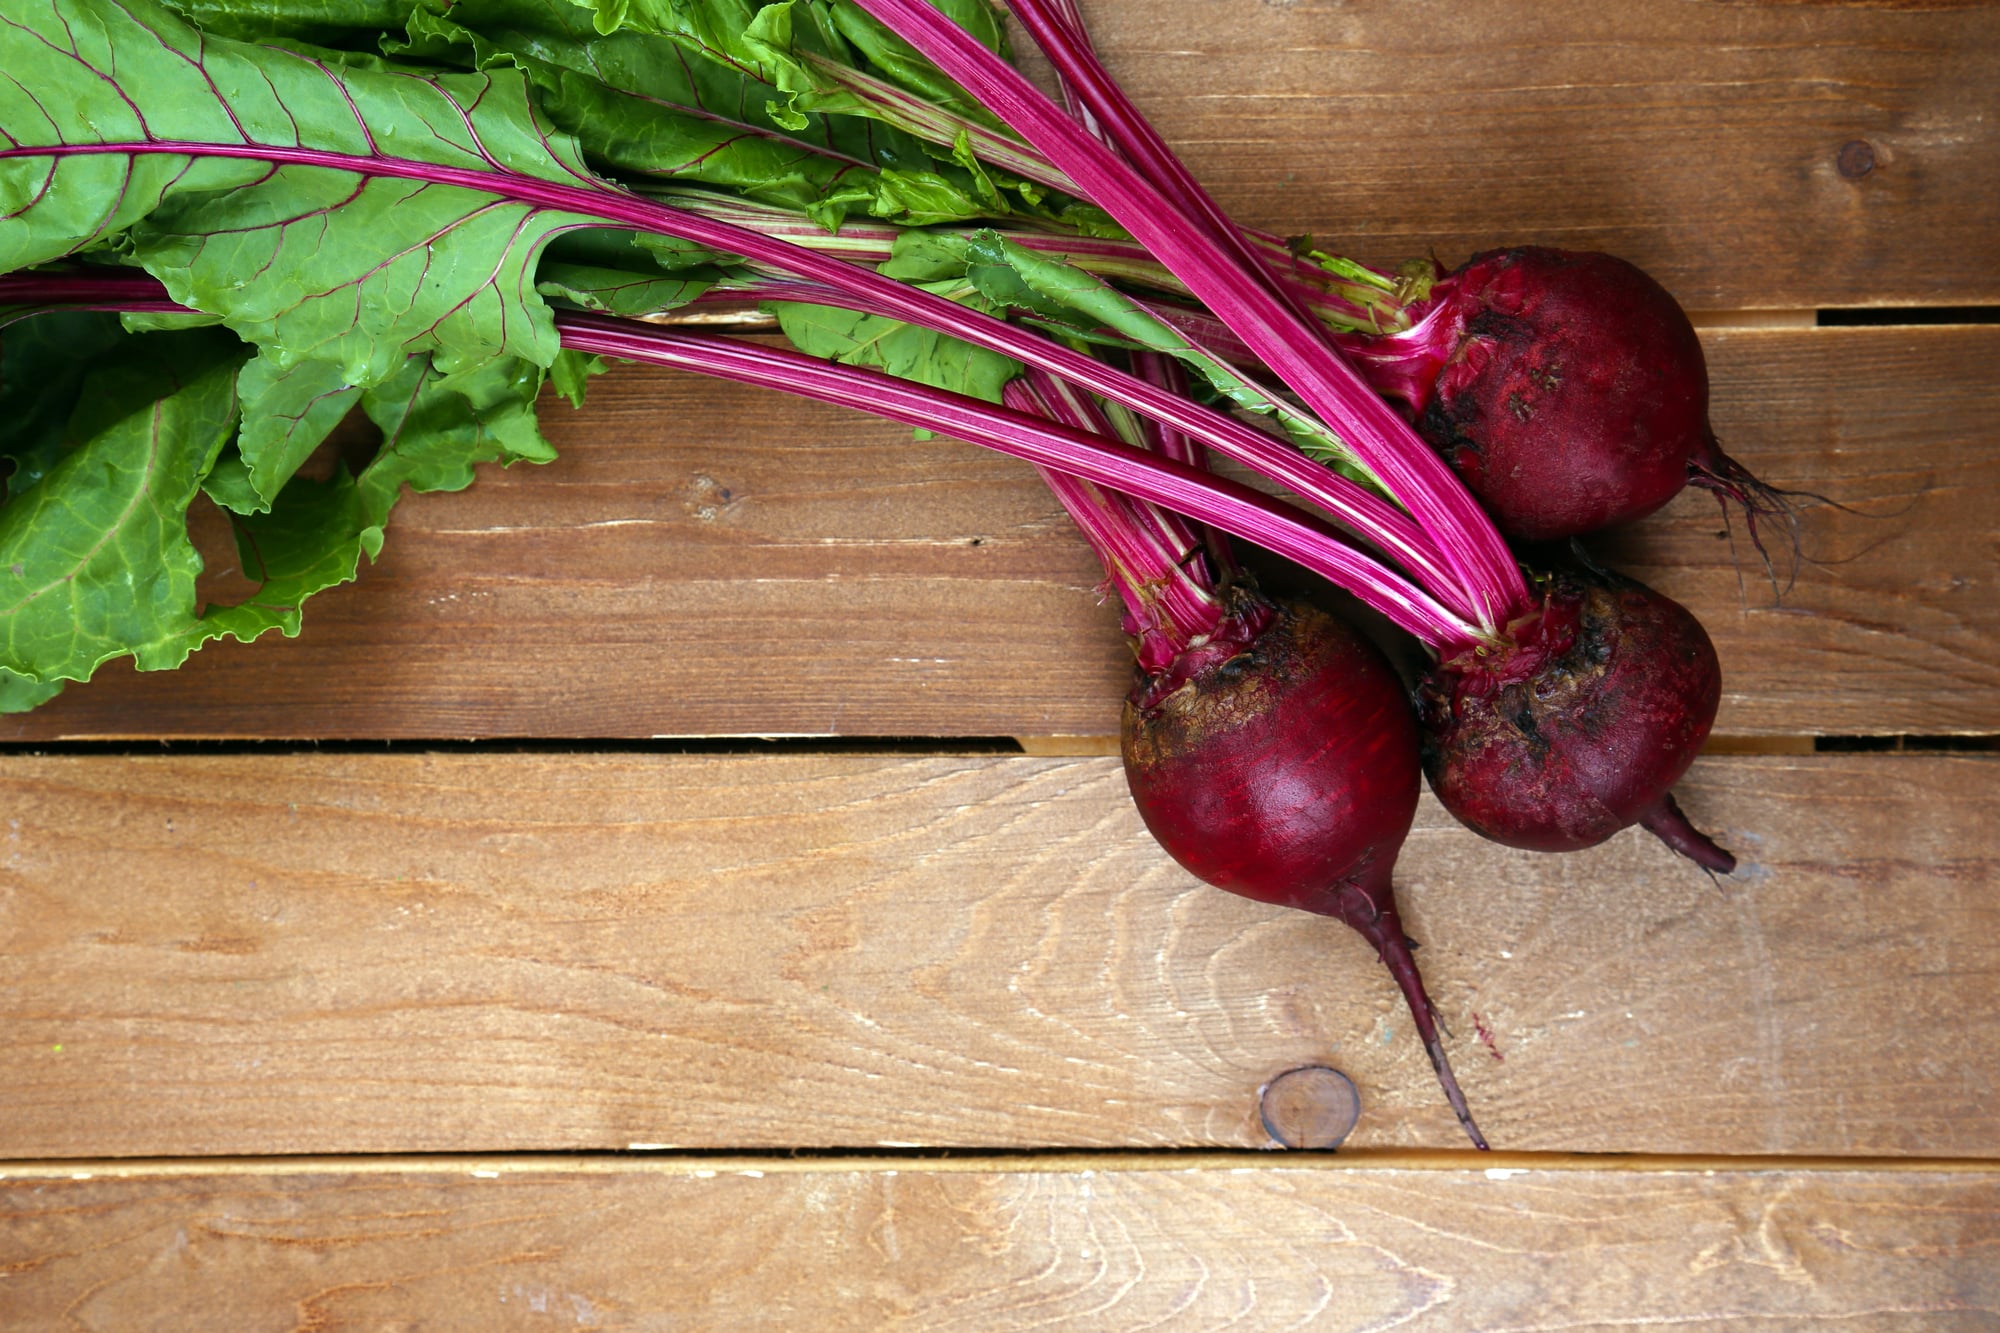 Young beets on a wooden table.